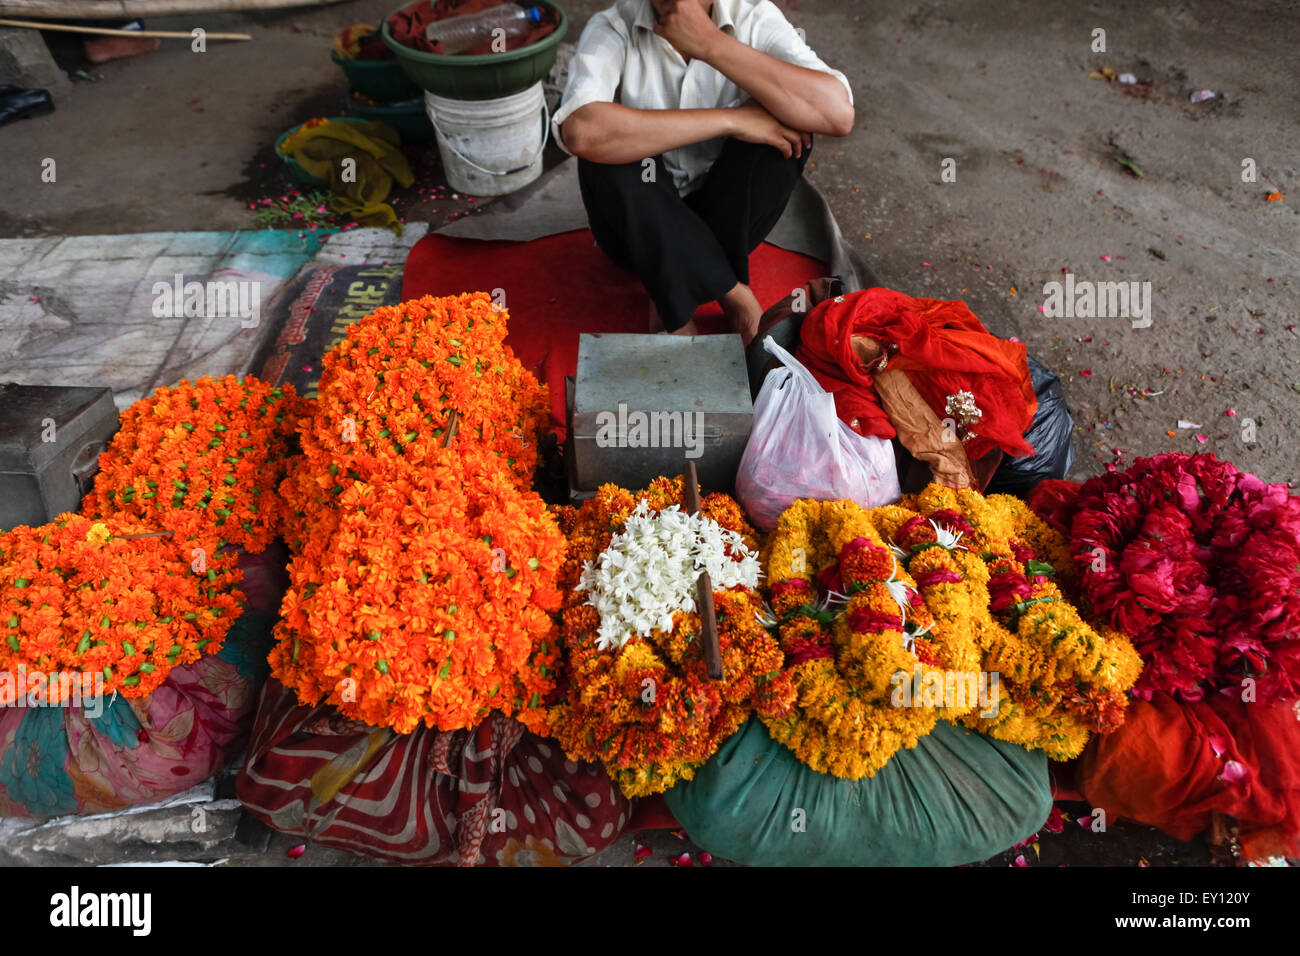 Flowers on sale for religious or decoration purposes are photographed at a roadside vendor in Jaipur, Rajasthan, India. Stock Photo